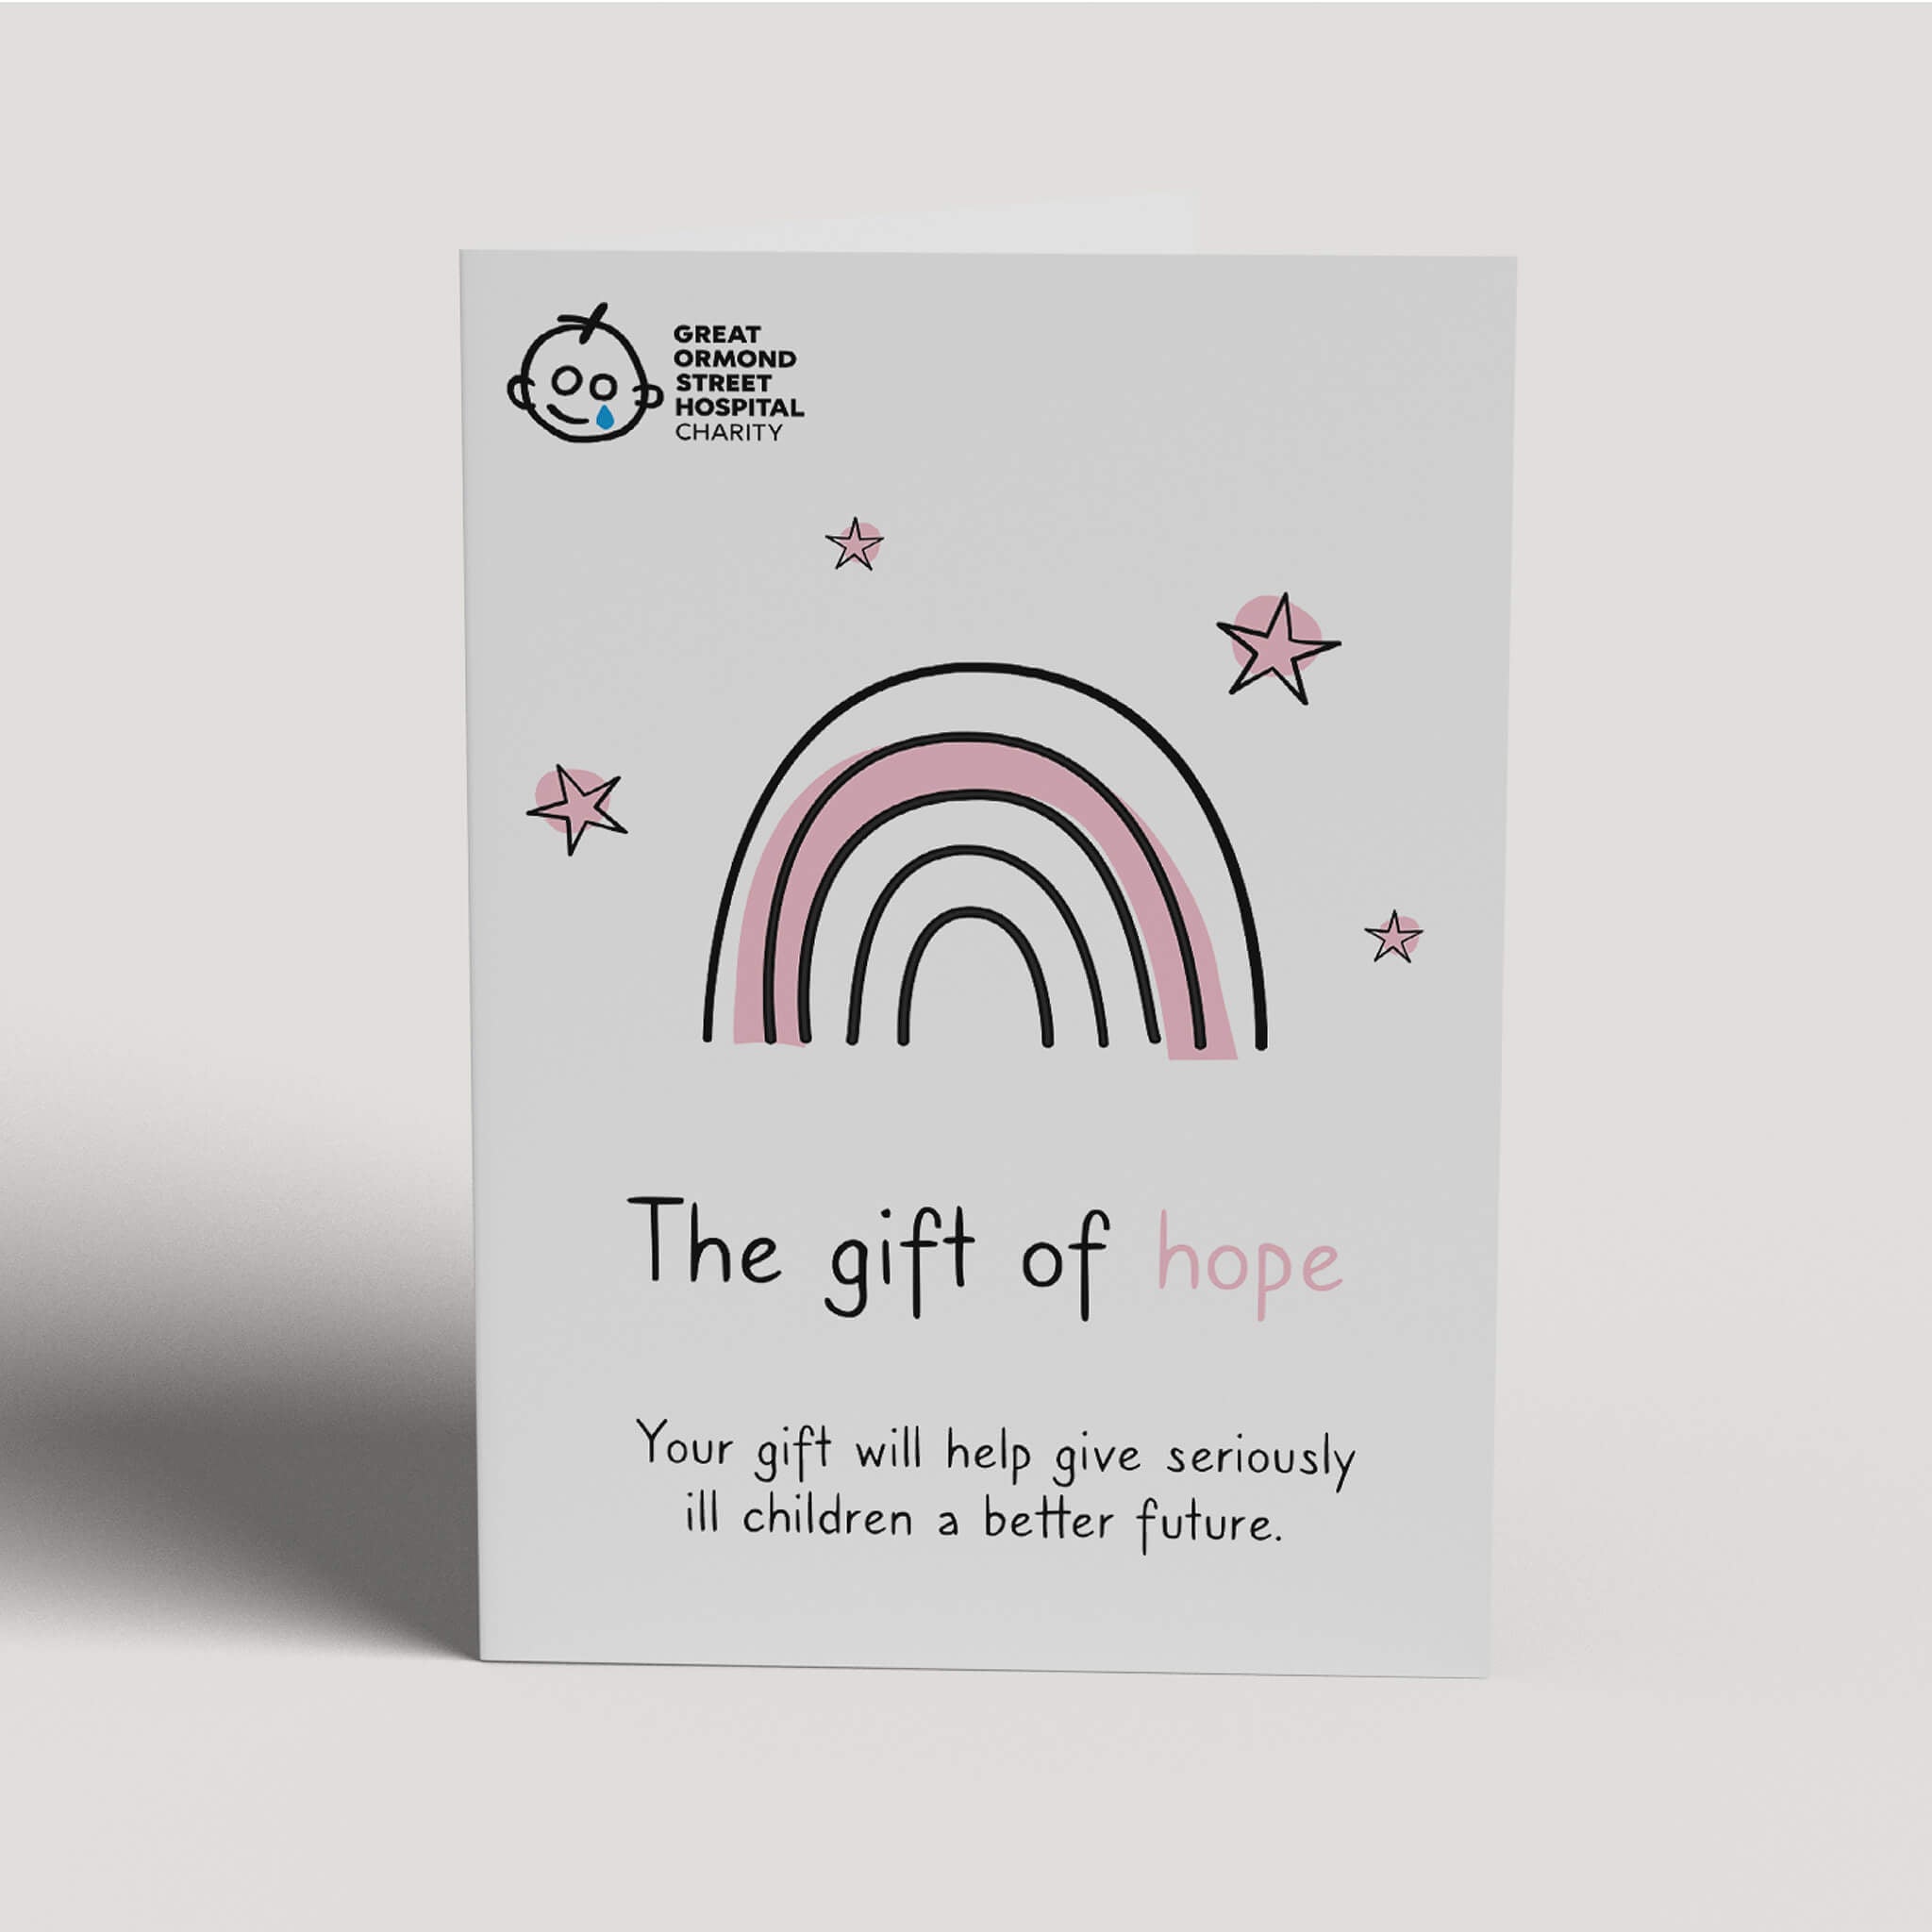 GOSH_Charity_alternative_gift_card_for_donations_to_children